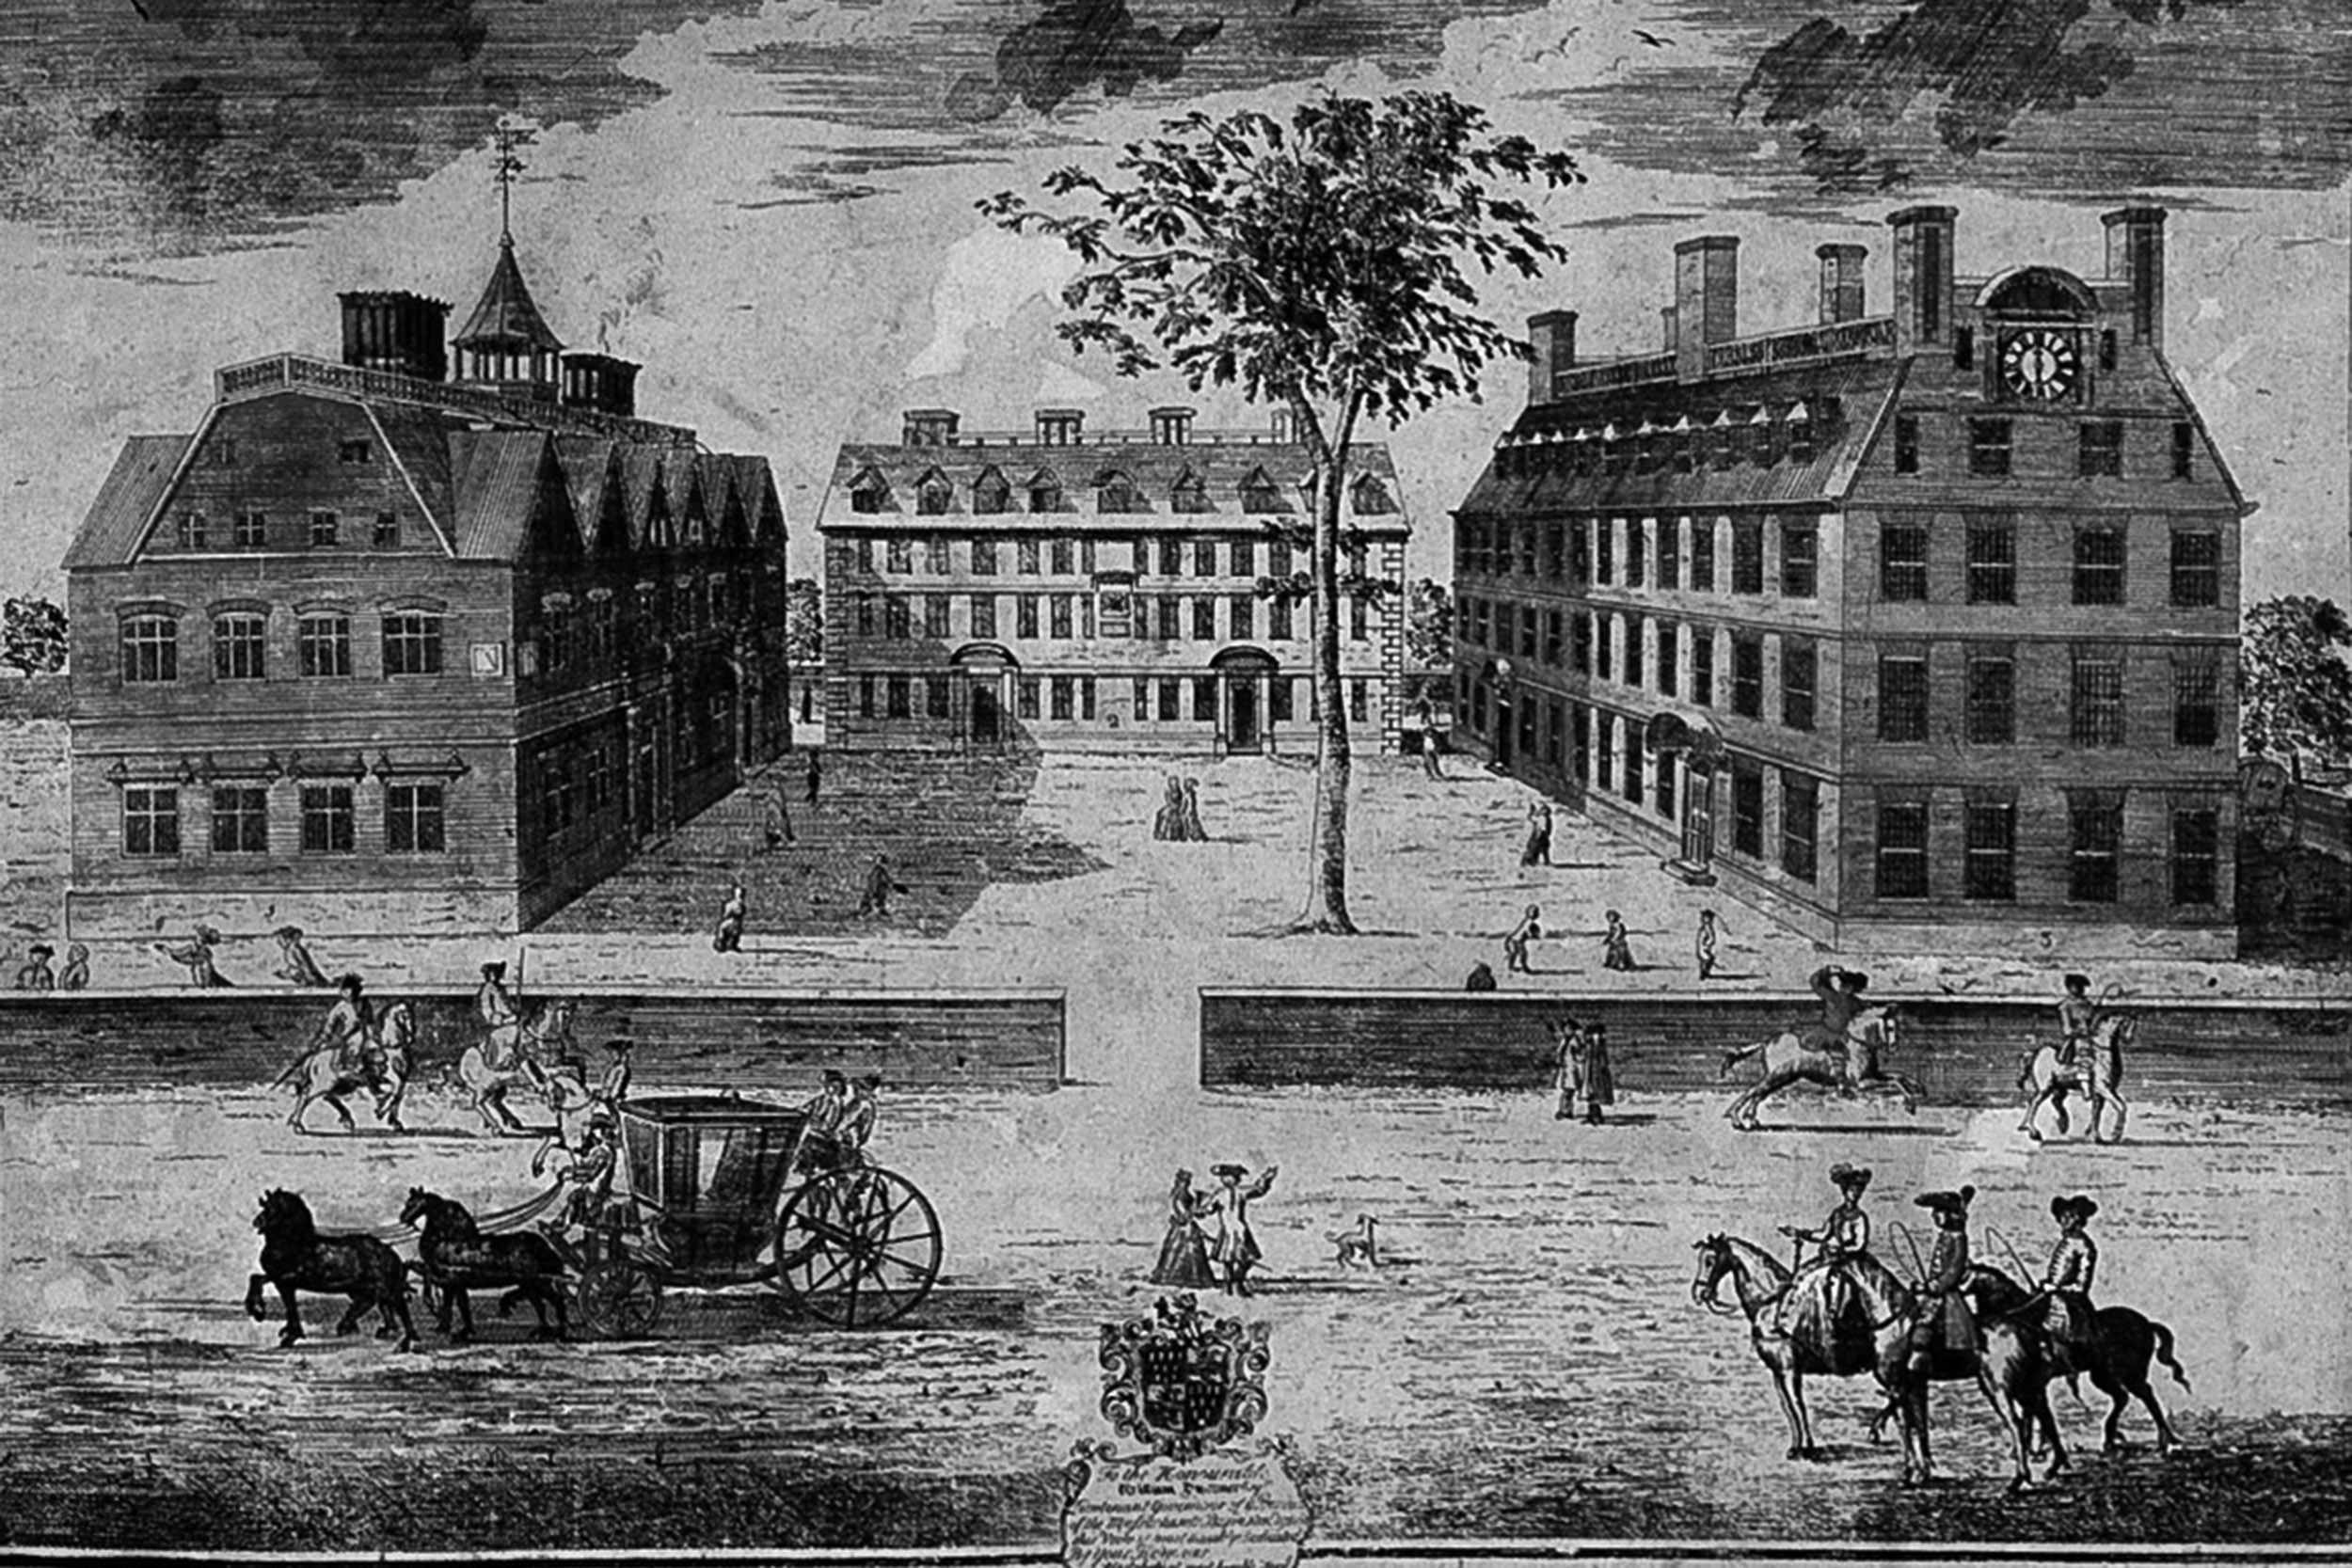 Engraving of Harvard in 1726. "A Prospect of the Colledges in Cambridge in New England," William Burgis, 1726.